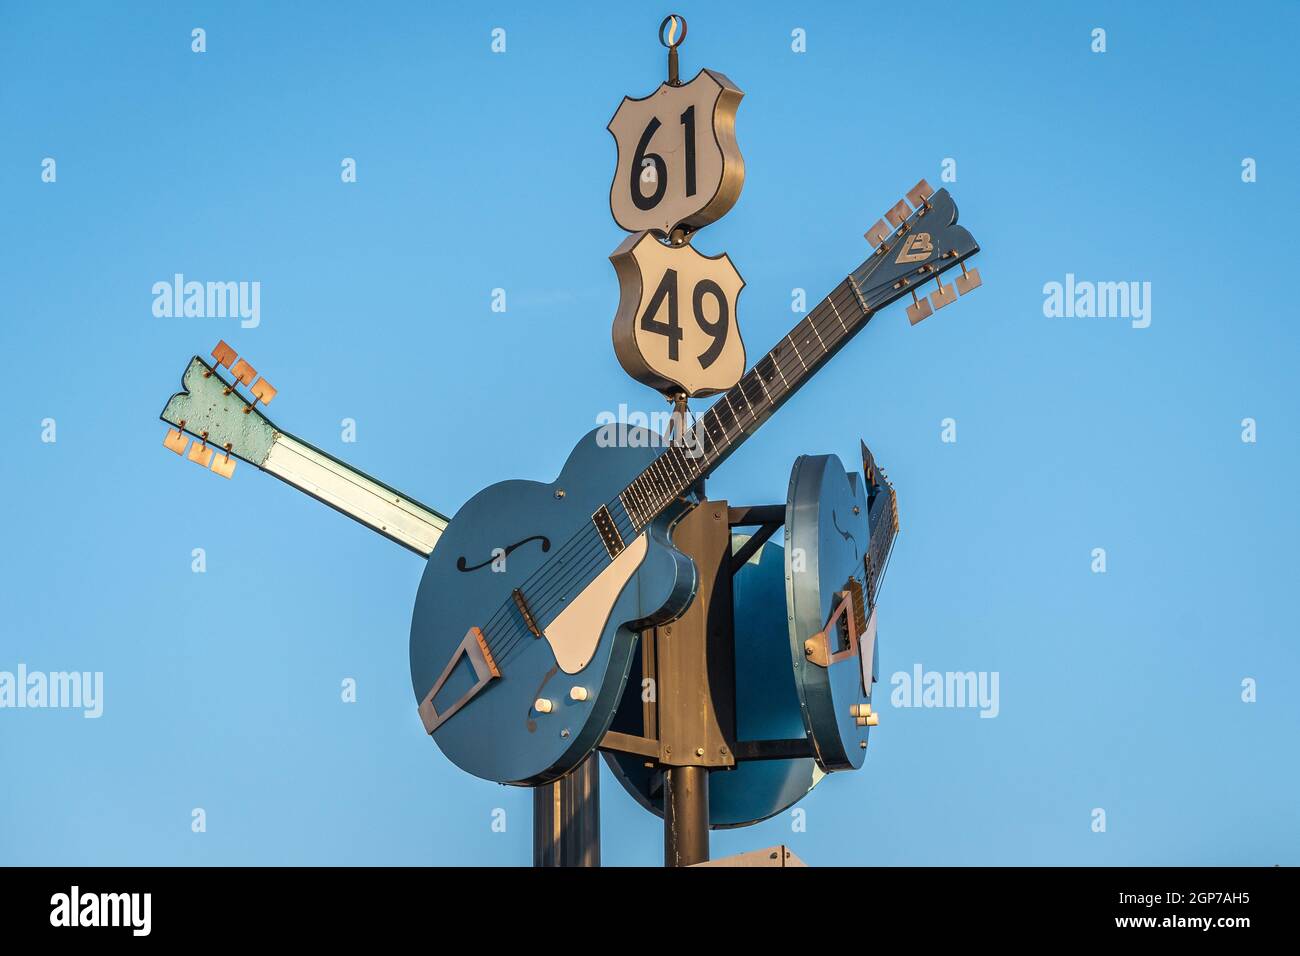 The Devil's Crossroads of Blues Highway 61 and Highway 49 in Clarksdale, Mississippi where musician Robert Johnson supposedly sold his soul to Devil. Stock Photo